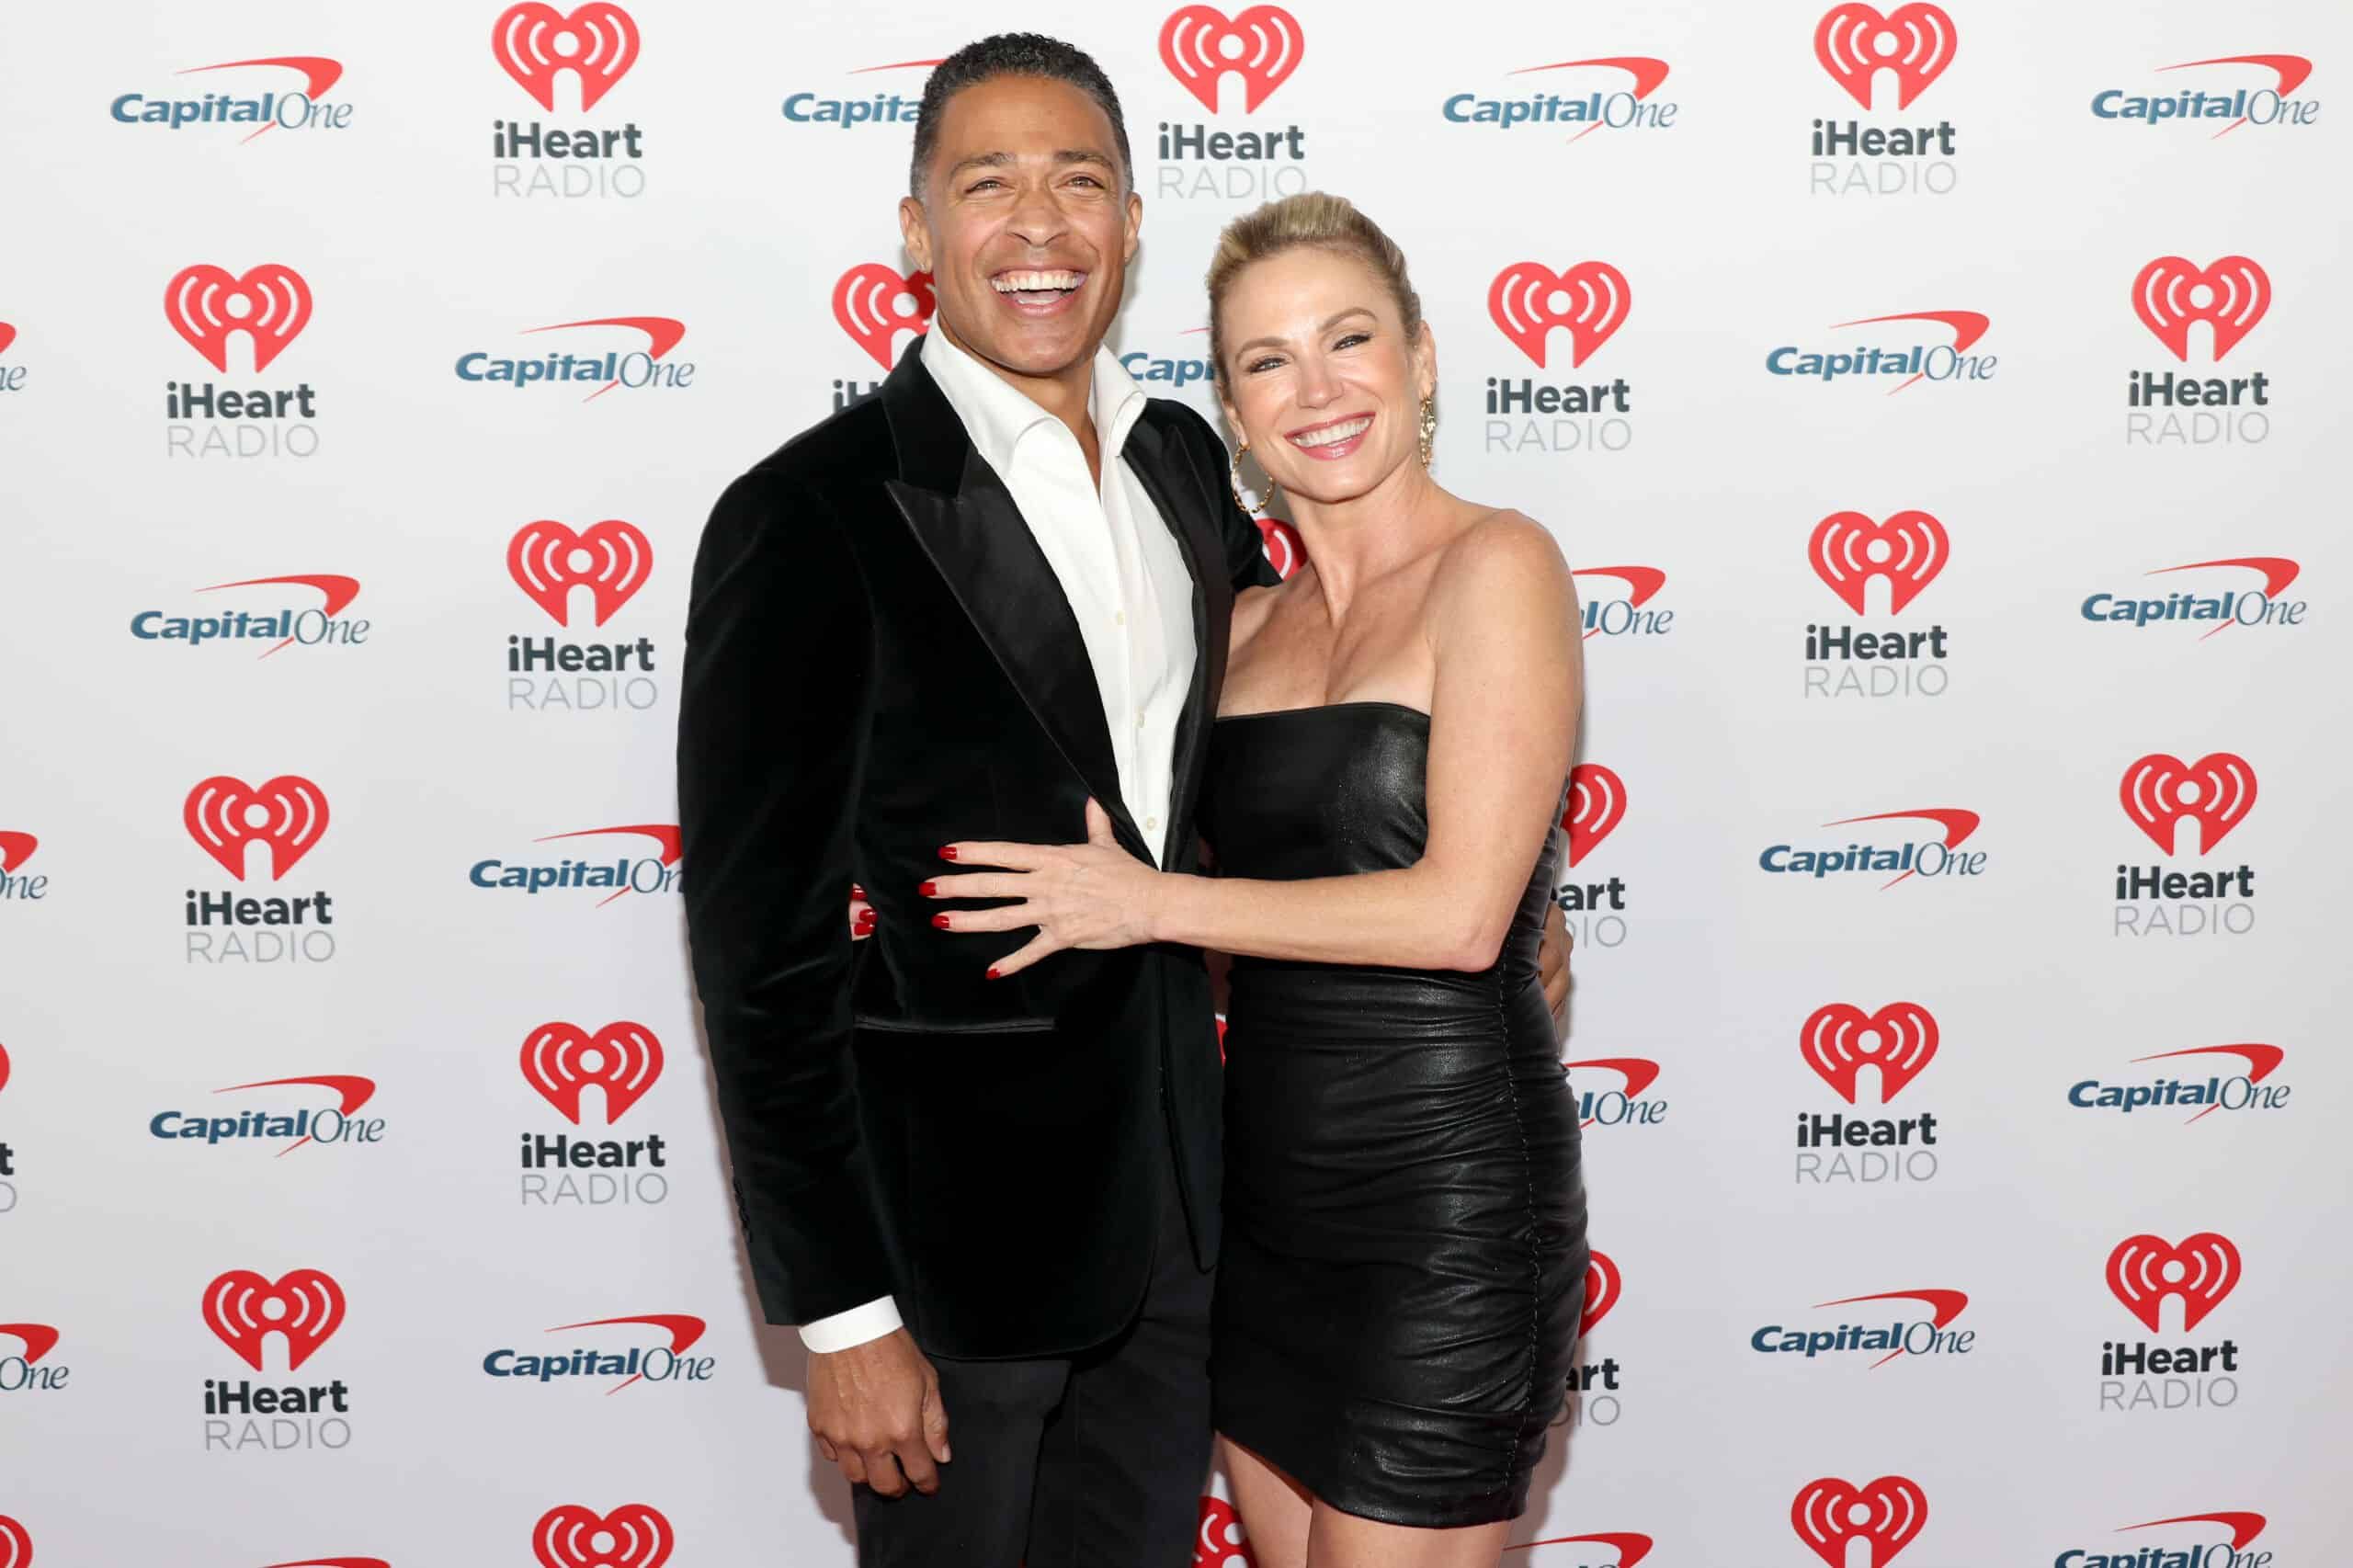 Amy Robach and T.J. Holmes Refuse To Comment On Ex-Spouses' Relationship